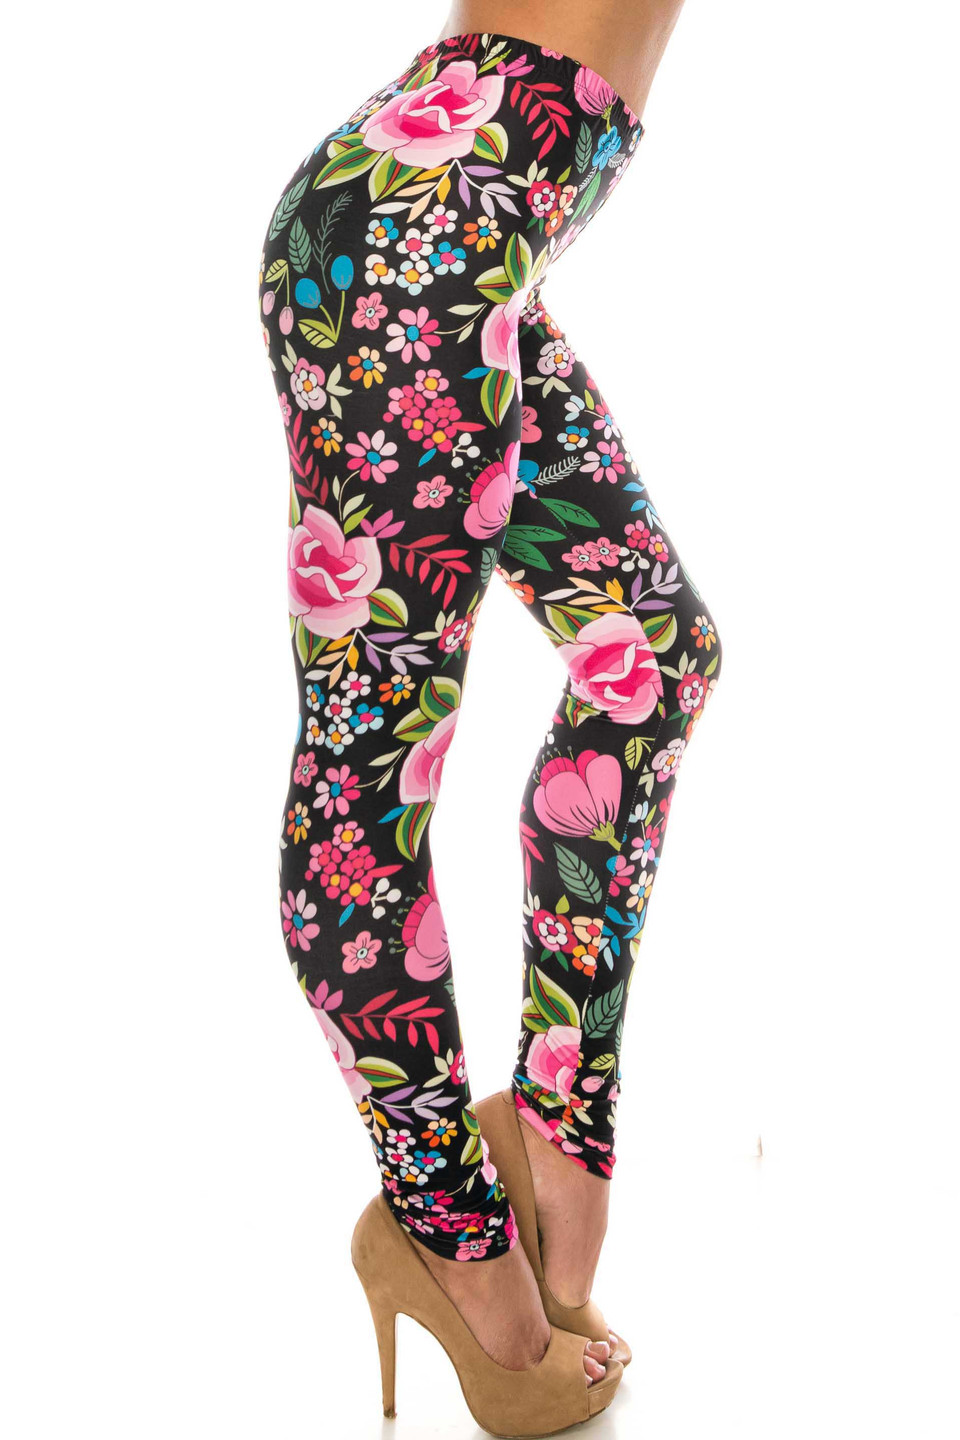 Colorful Plus Size Leggings | Only Leggings Superstore